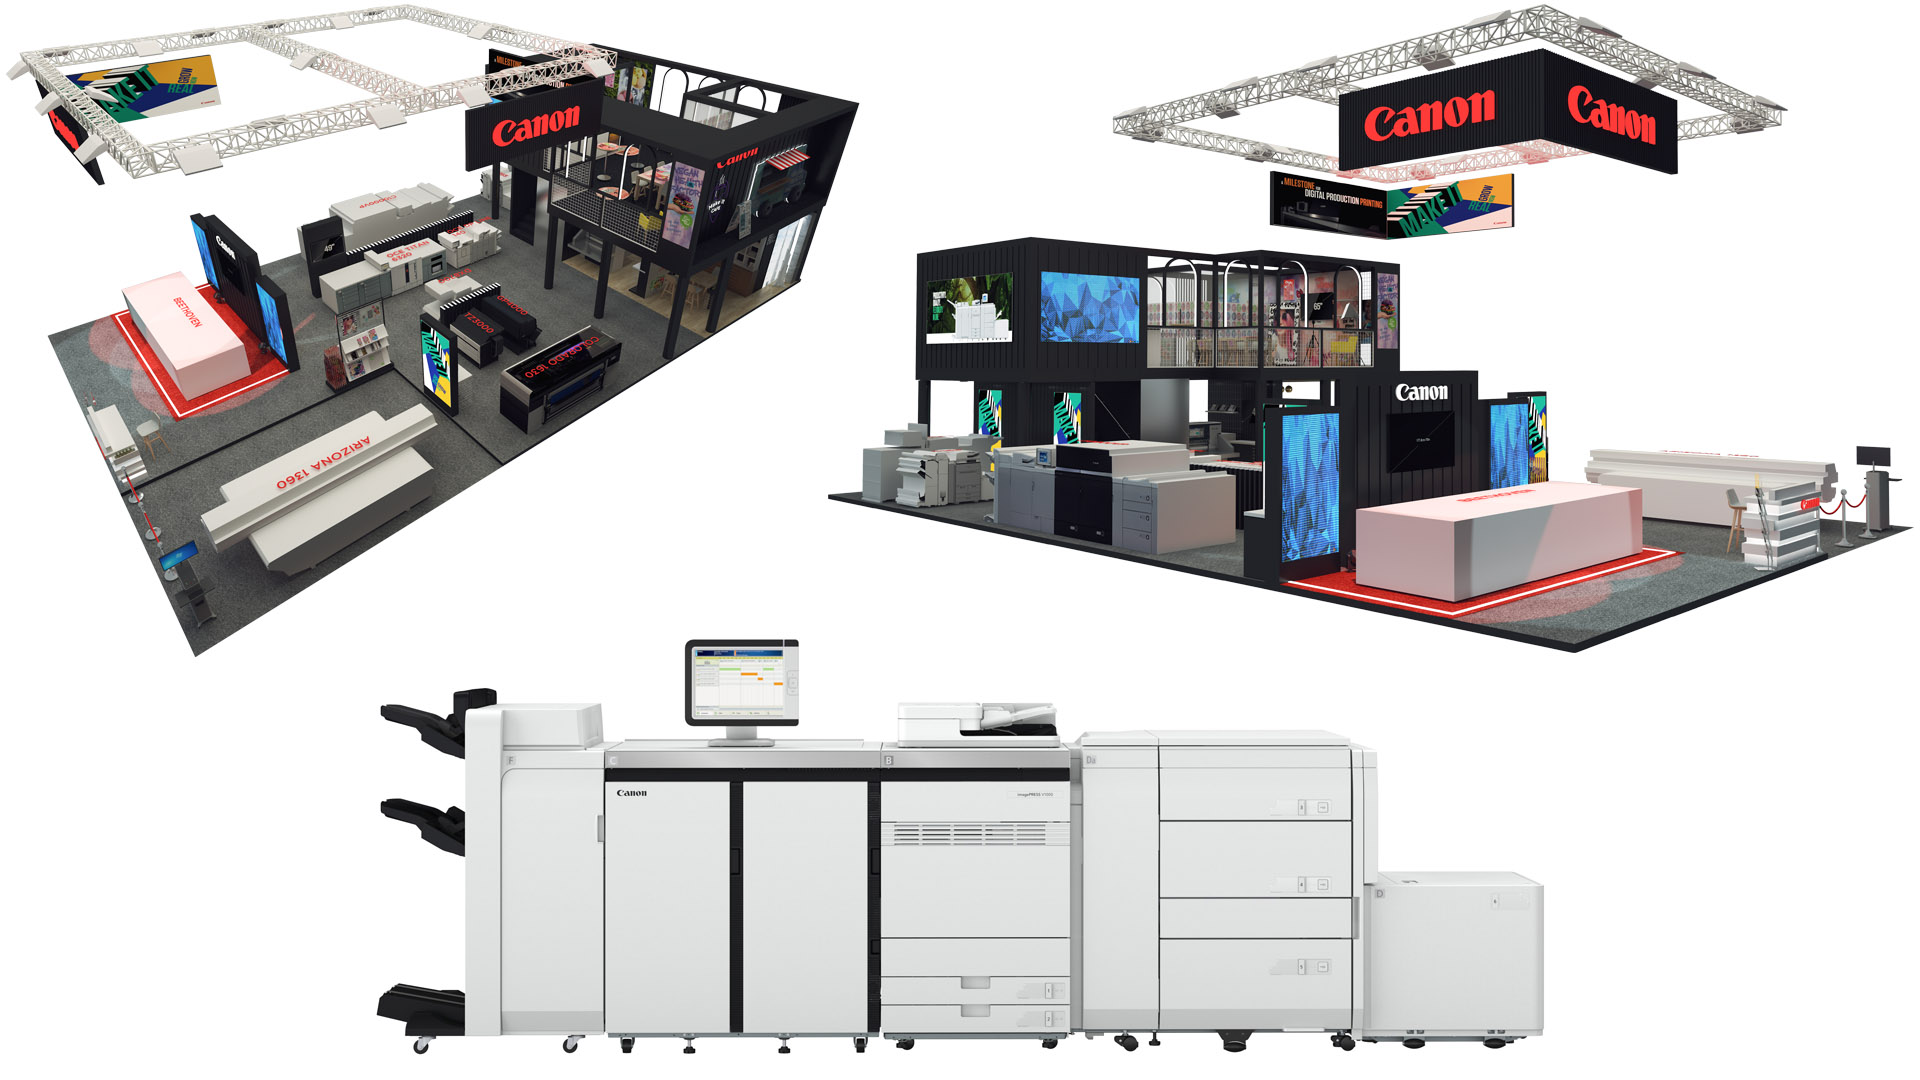 Revolutionary Canon imagePRESS V1000 will be unveiled at GPP